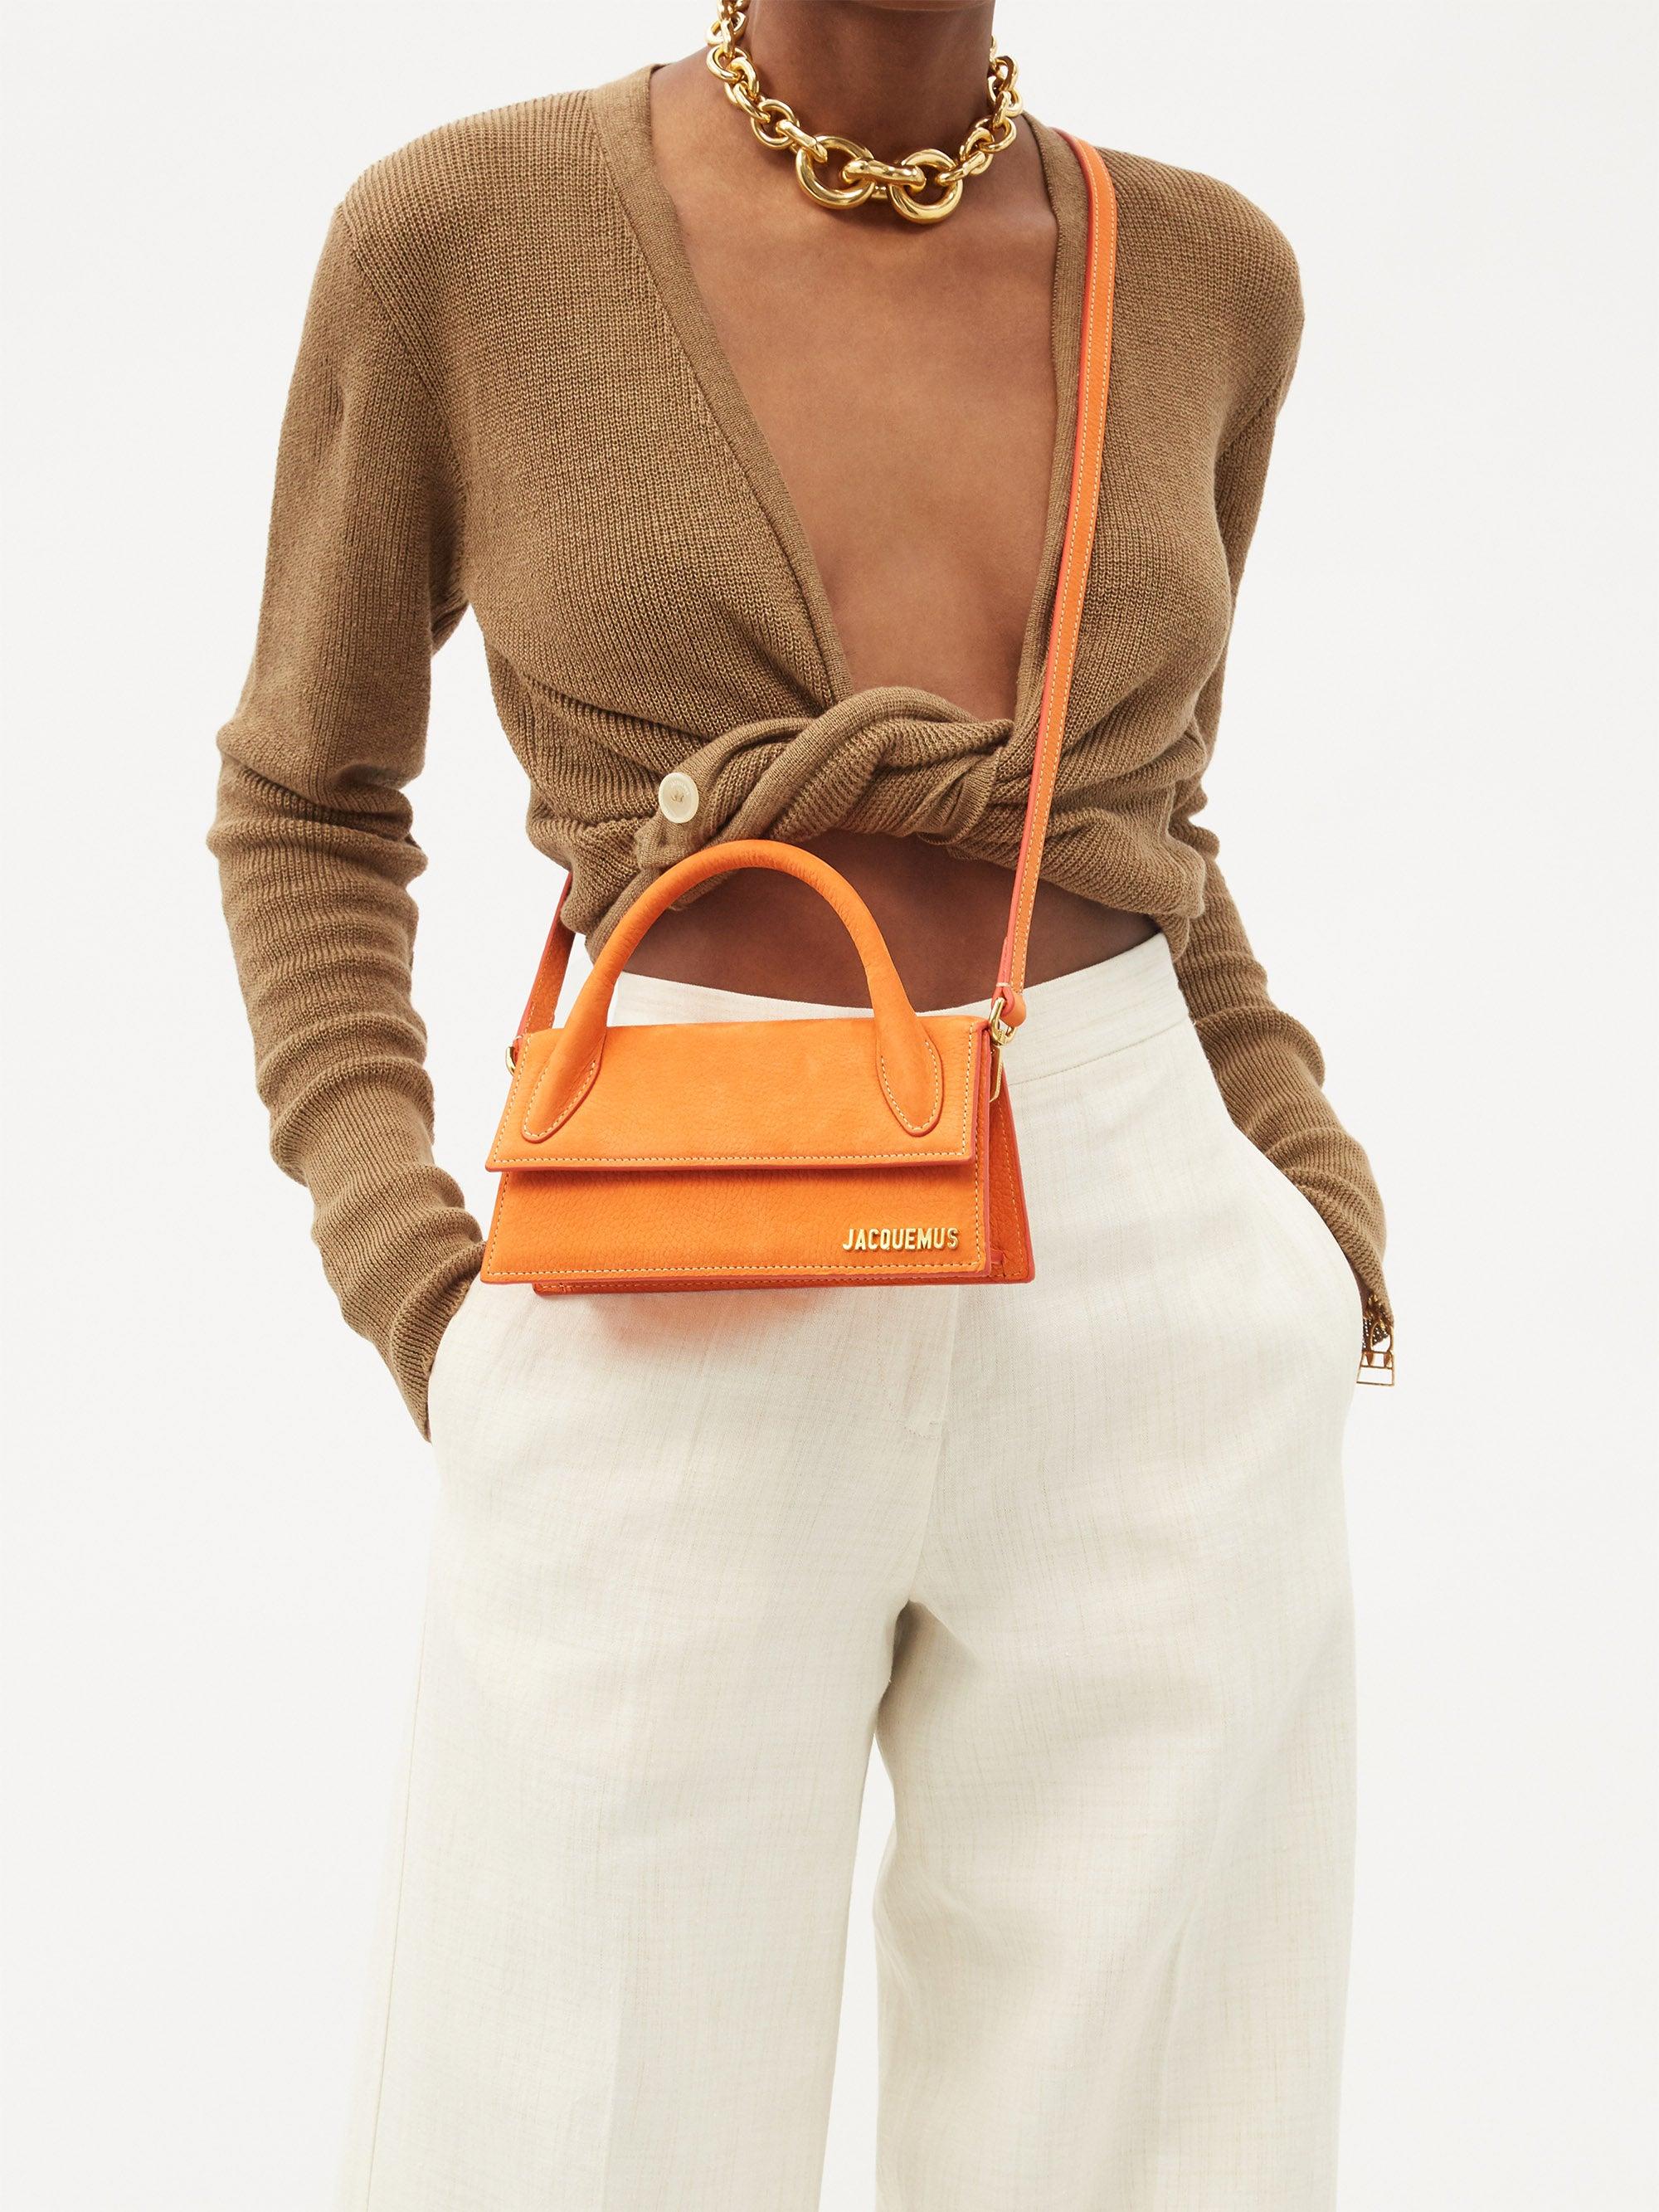 Jacquemus Chiquito Long Leather Cross-body Bag in Orange - Lyst